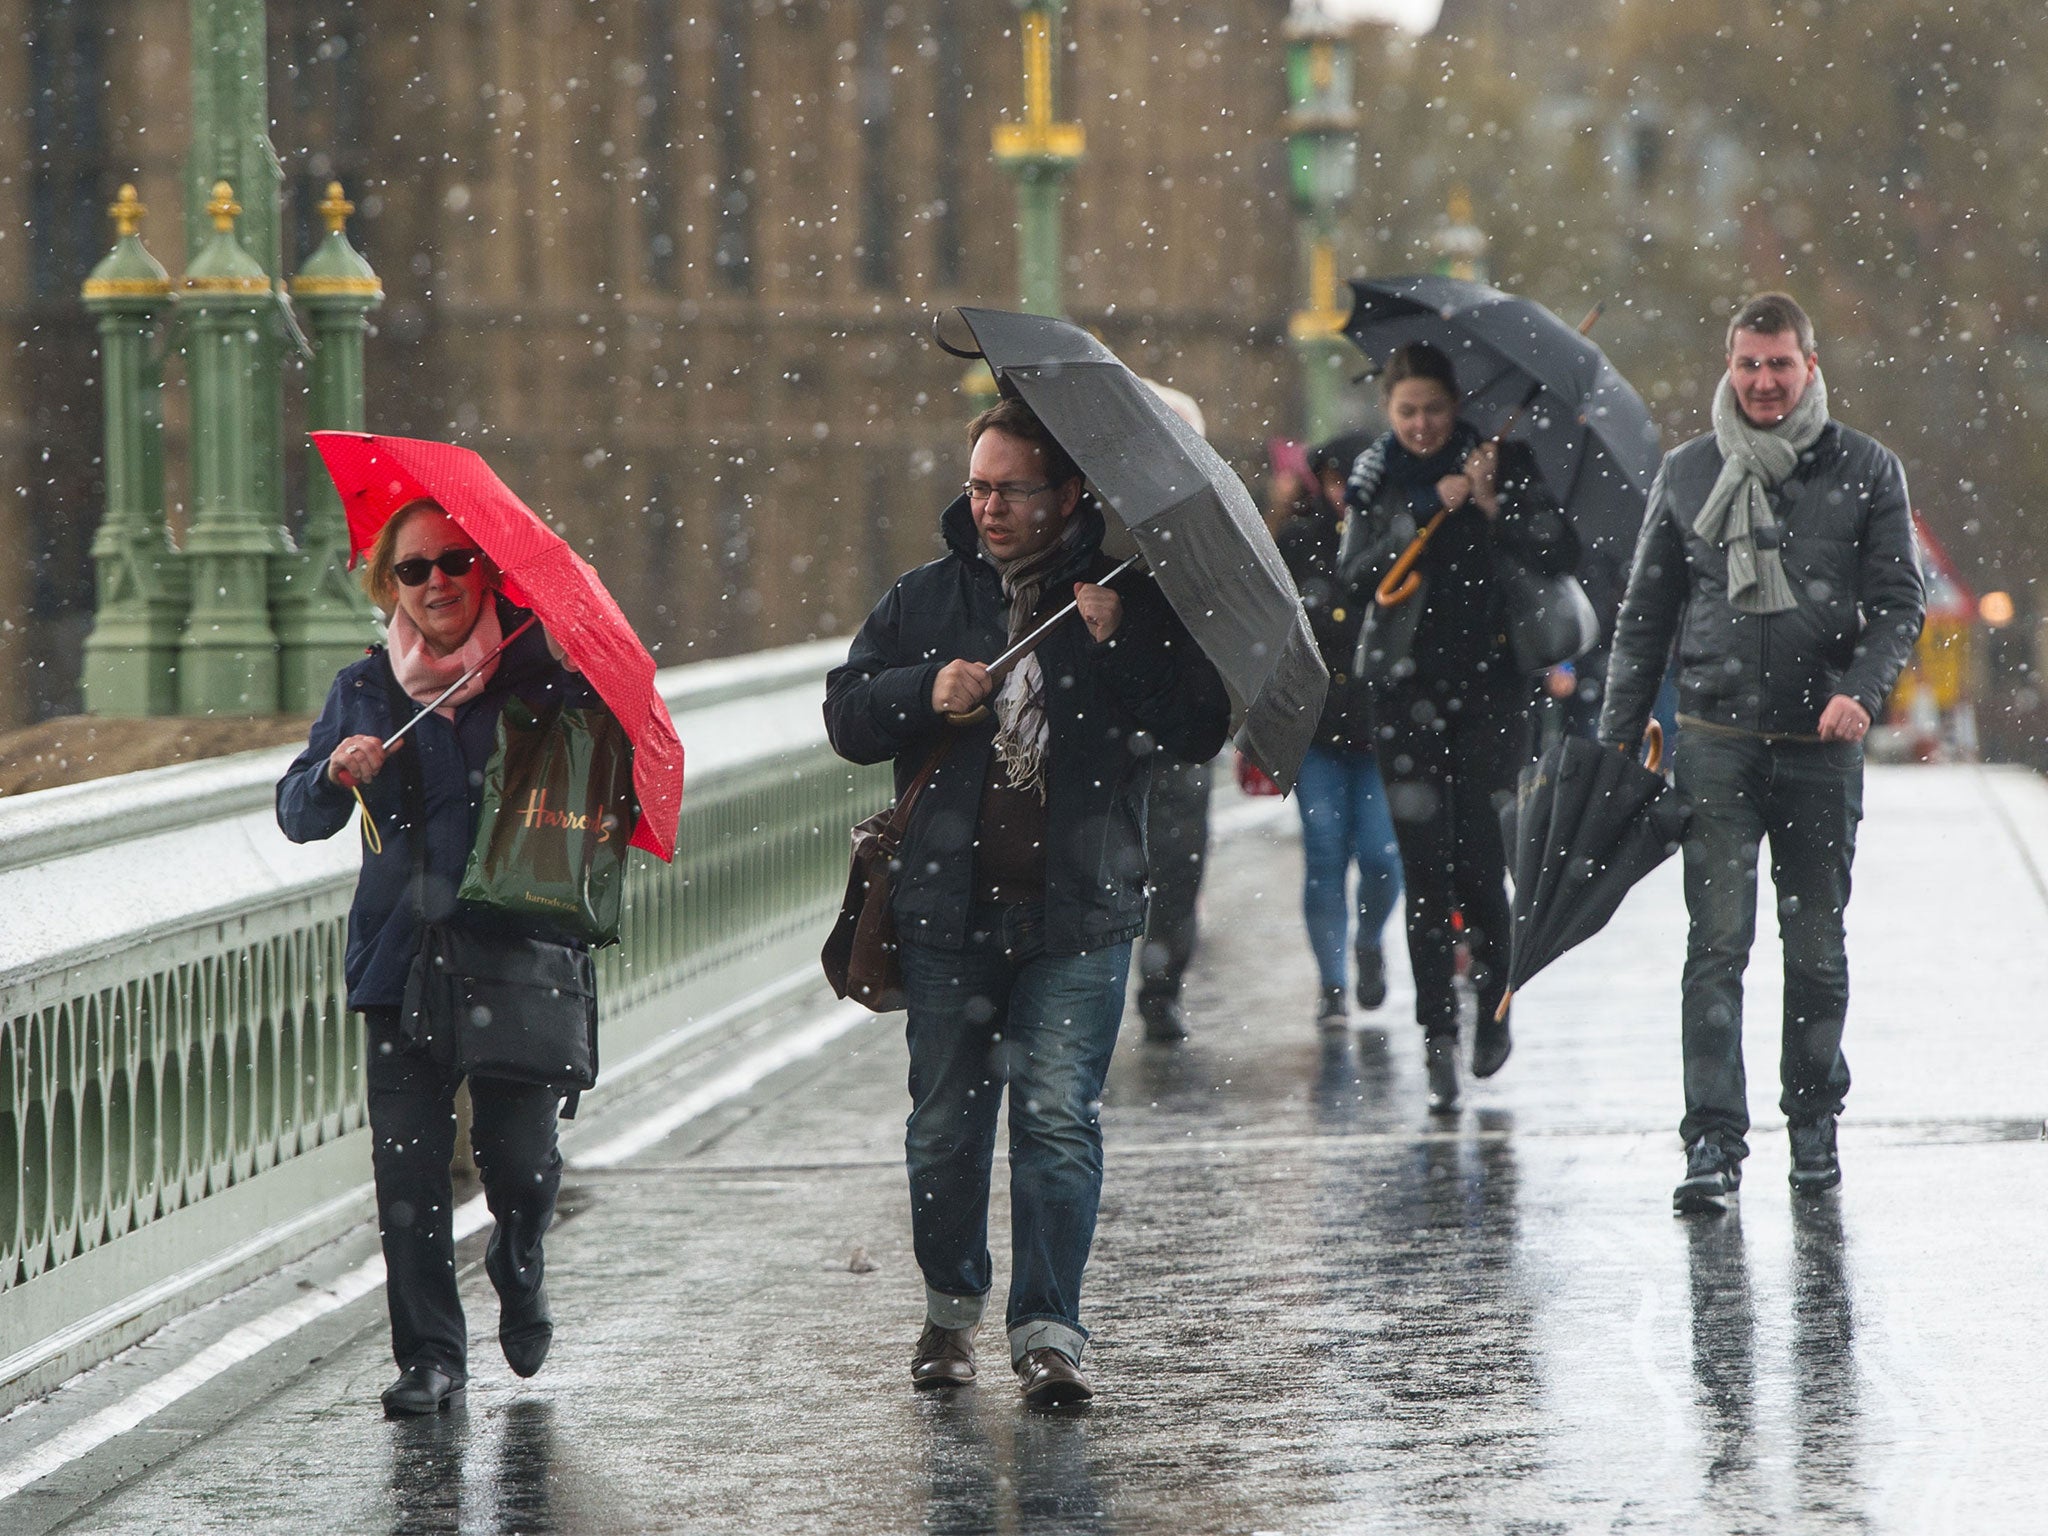 UK weather: London snow prompts shock in capital with wintry conditions ...